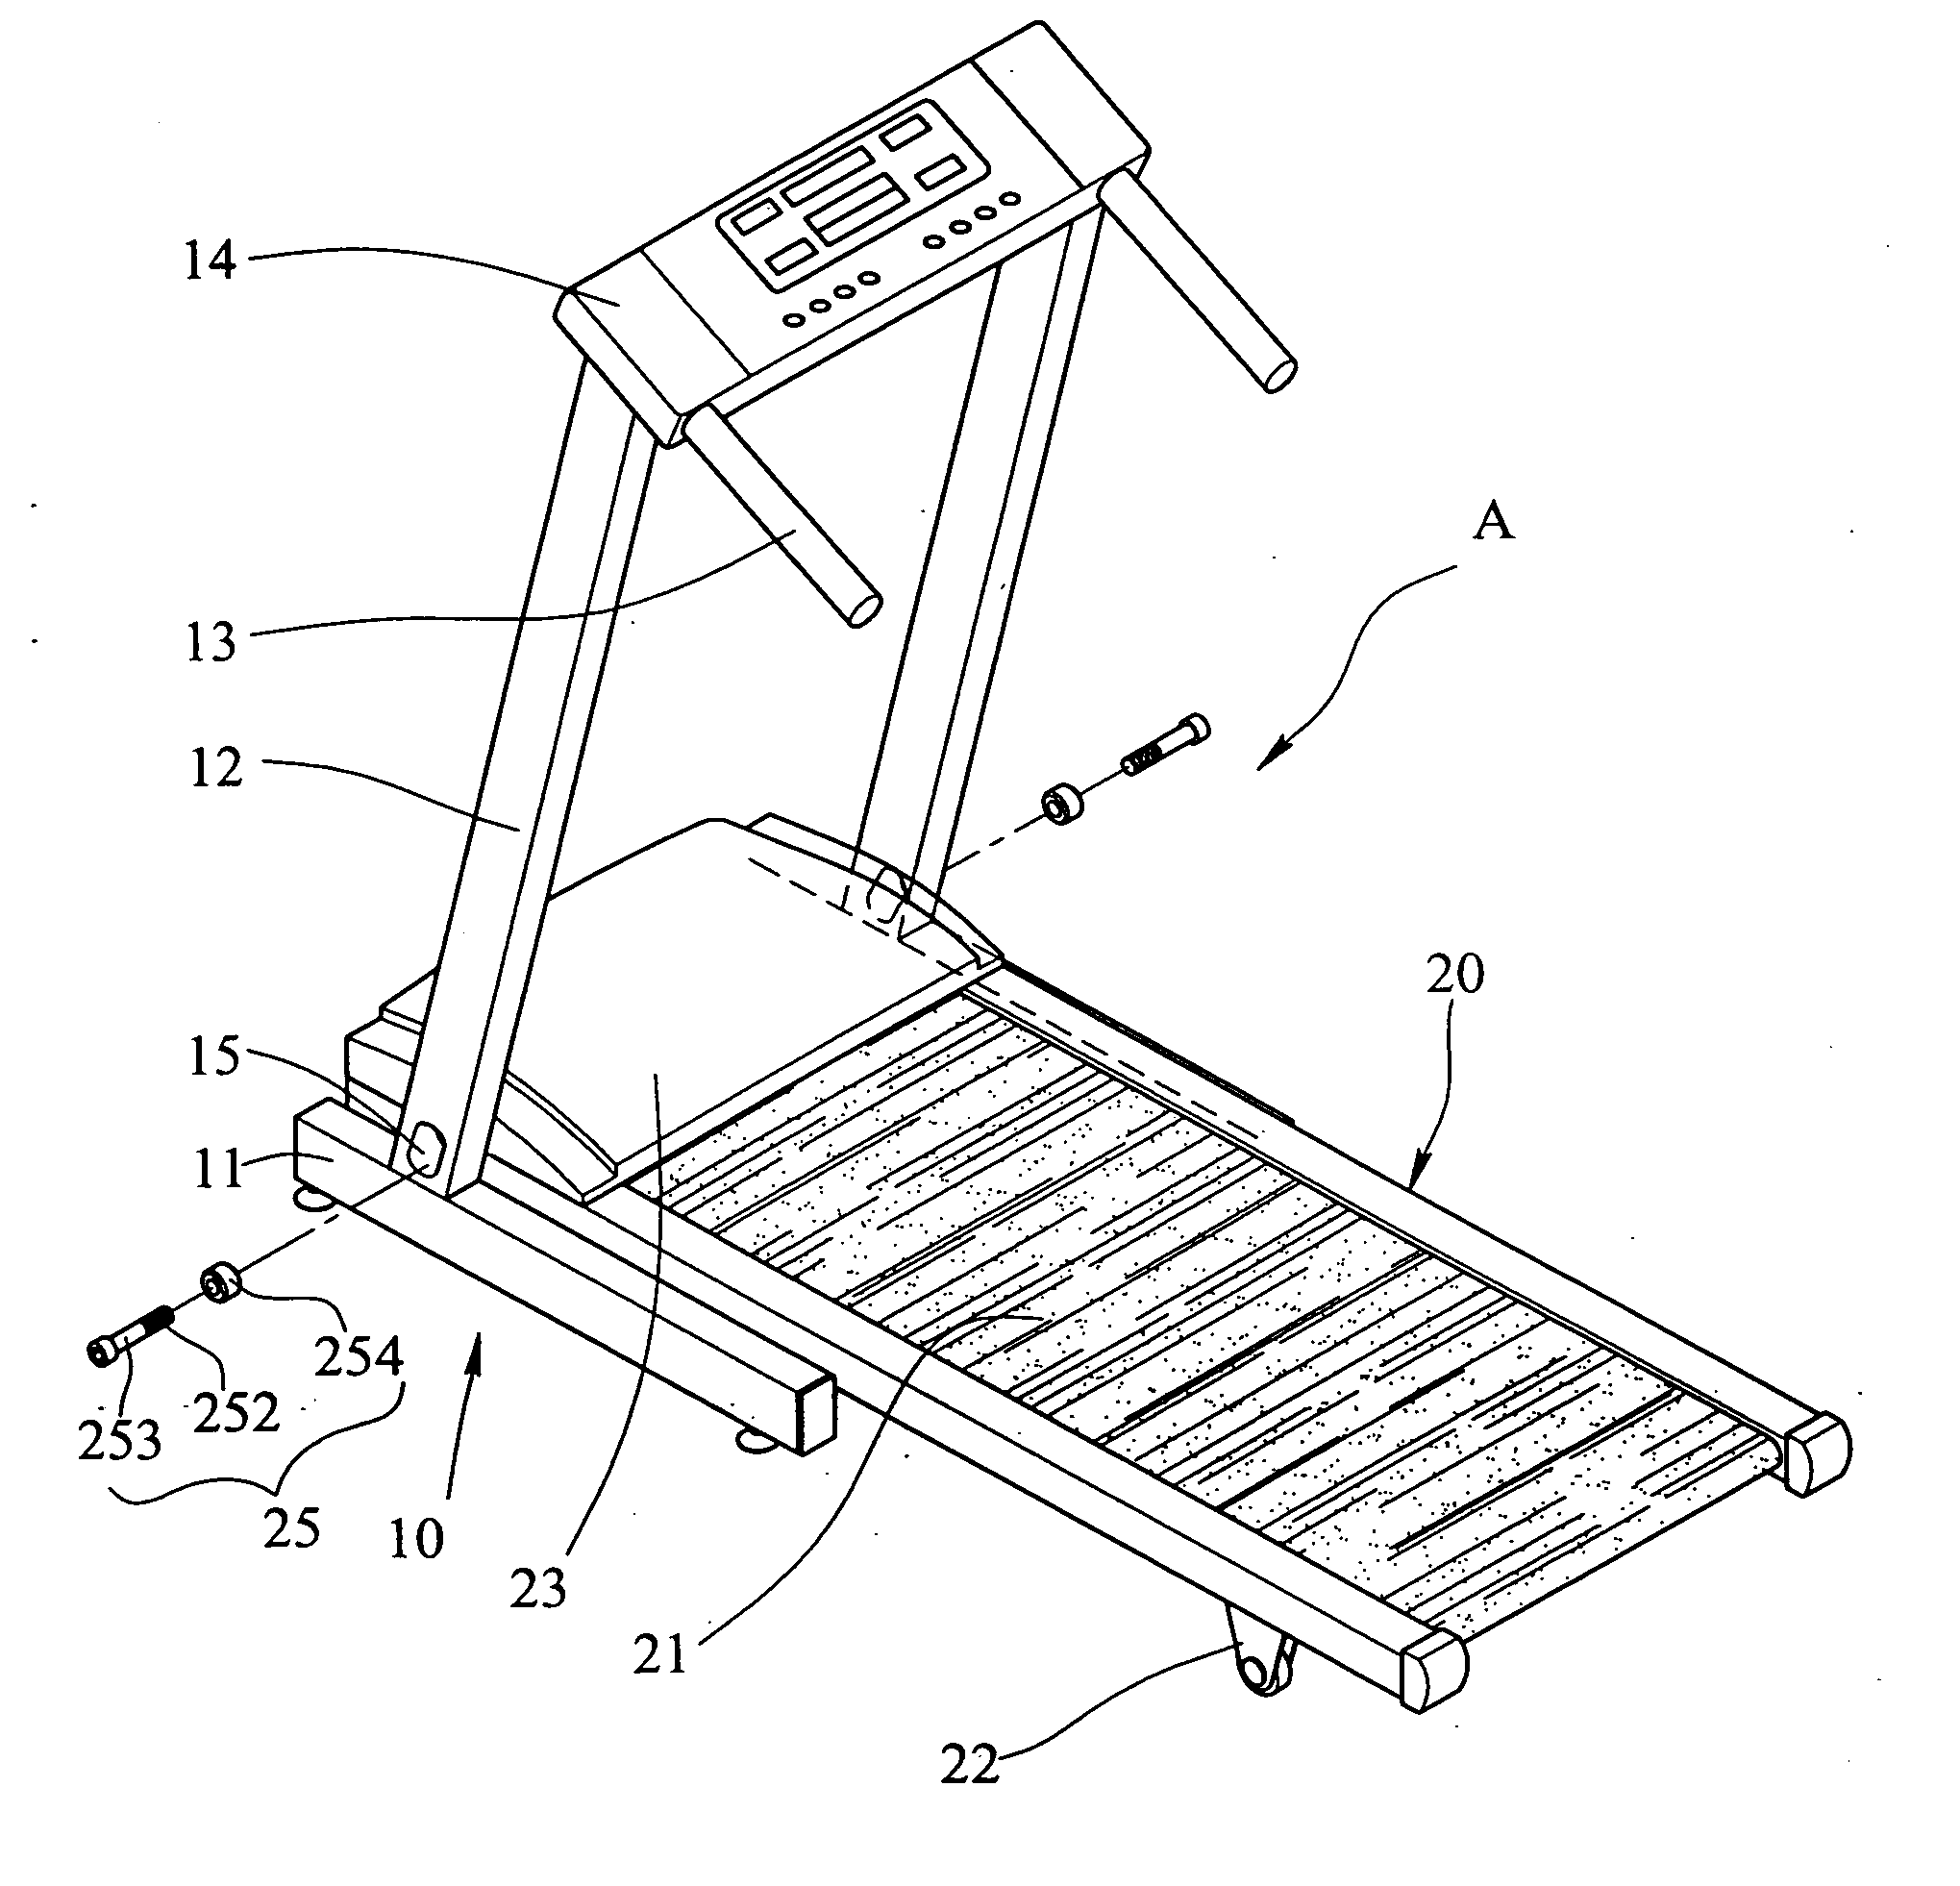 Folding and inclination adjustable device for treadmills